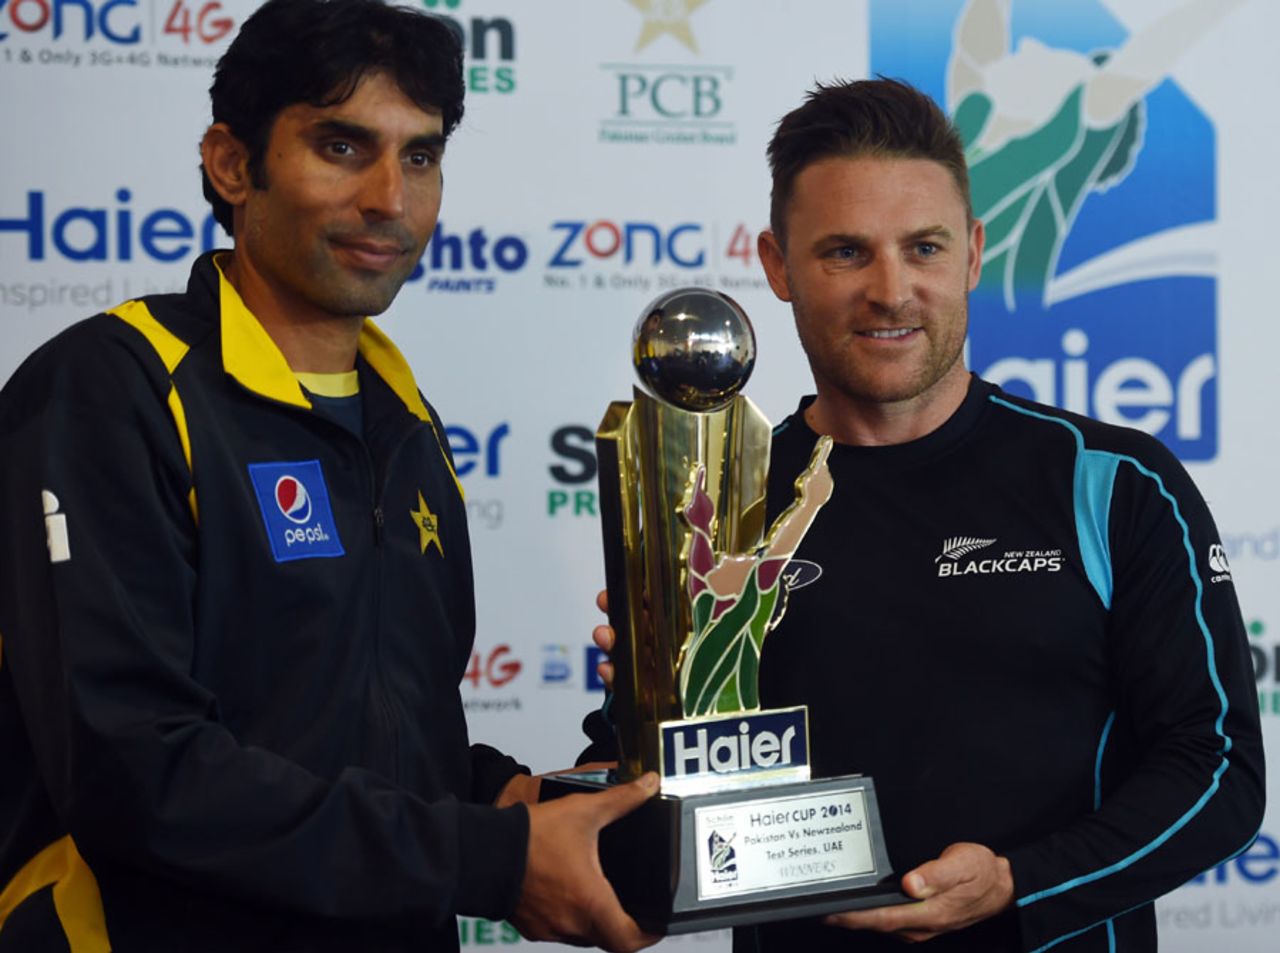 Brendon McCullum and Misbah-ul-Haq pose with the series trophy, Abu Dhabi, November 8, 2014